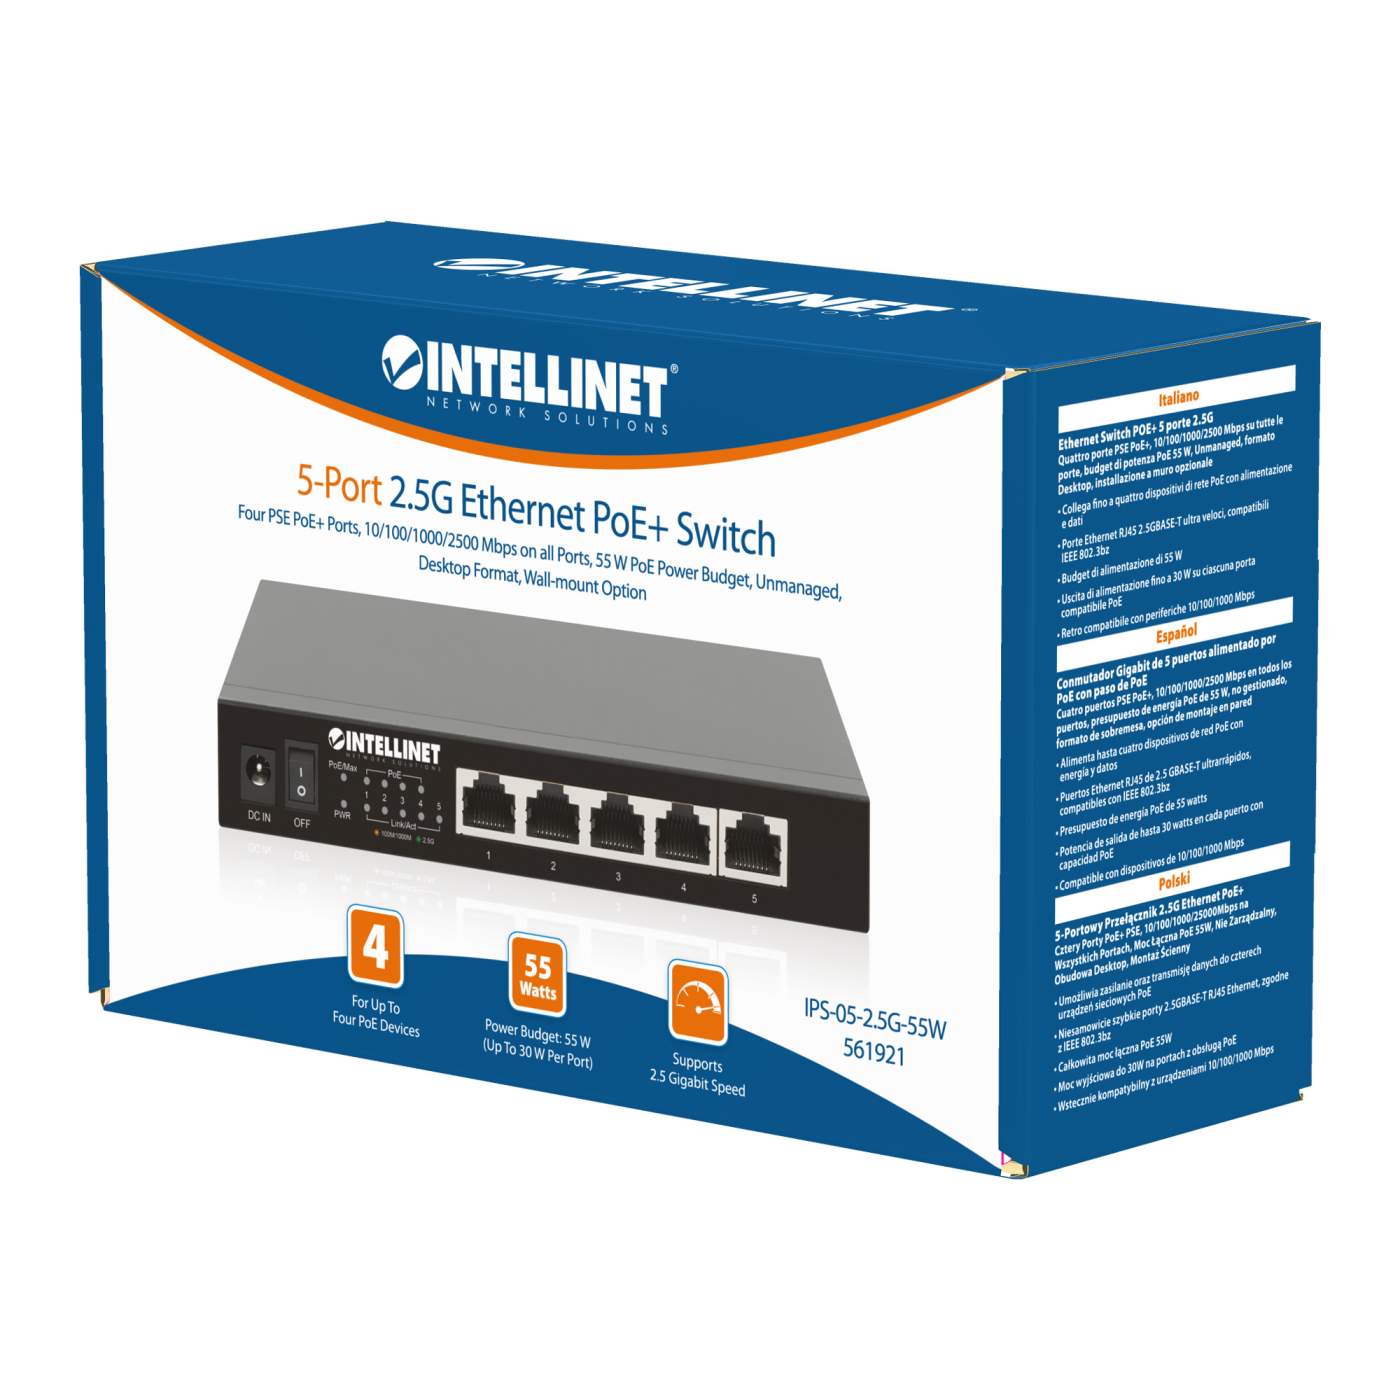 Binardat 5 Port Multi Gigabit Switch, 1 x 2.5 Gigabit and 4 x 1 Gigabit  Ethernet RJ-45 Ports, Metal Fanless, Desktop and Wall Mount, Unmanaged Plug  & Play Network Switch, Welcome to consult 